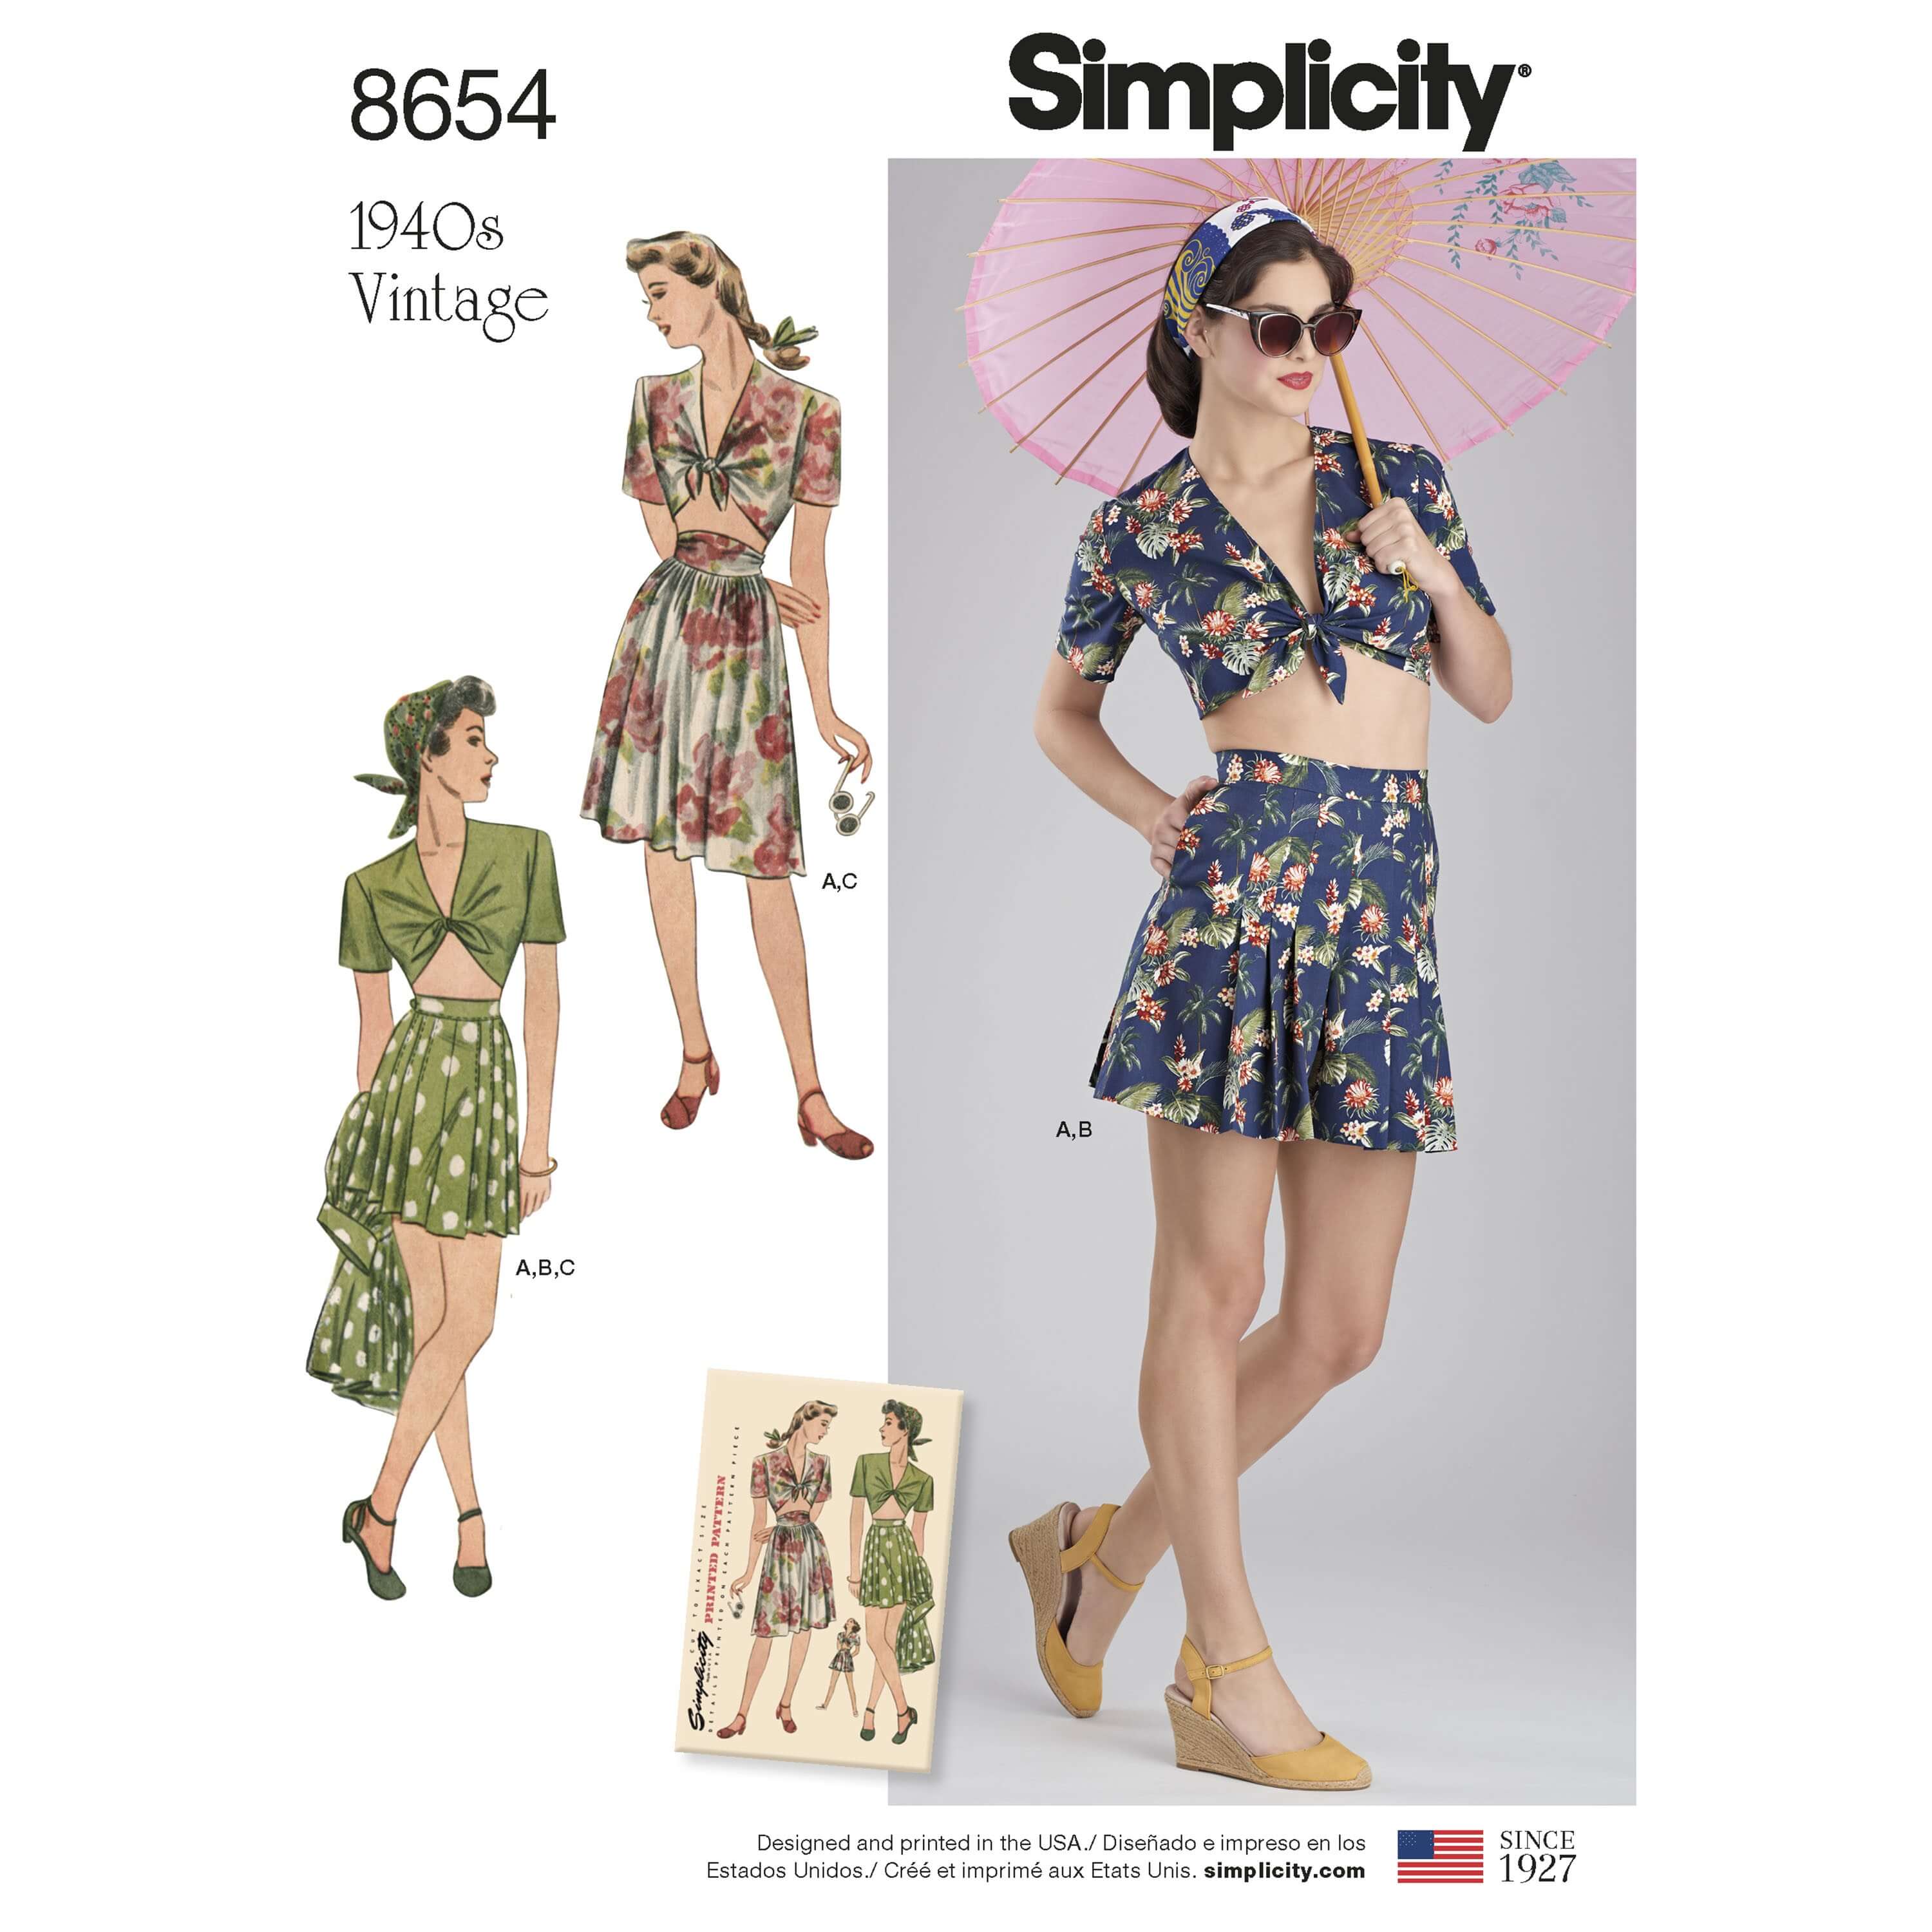 Simplicity Sewing Pattern 8654 Women’s Vintage 40s Skirt, Shorts & Tie Top